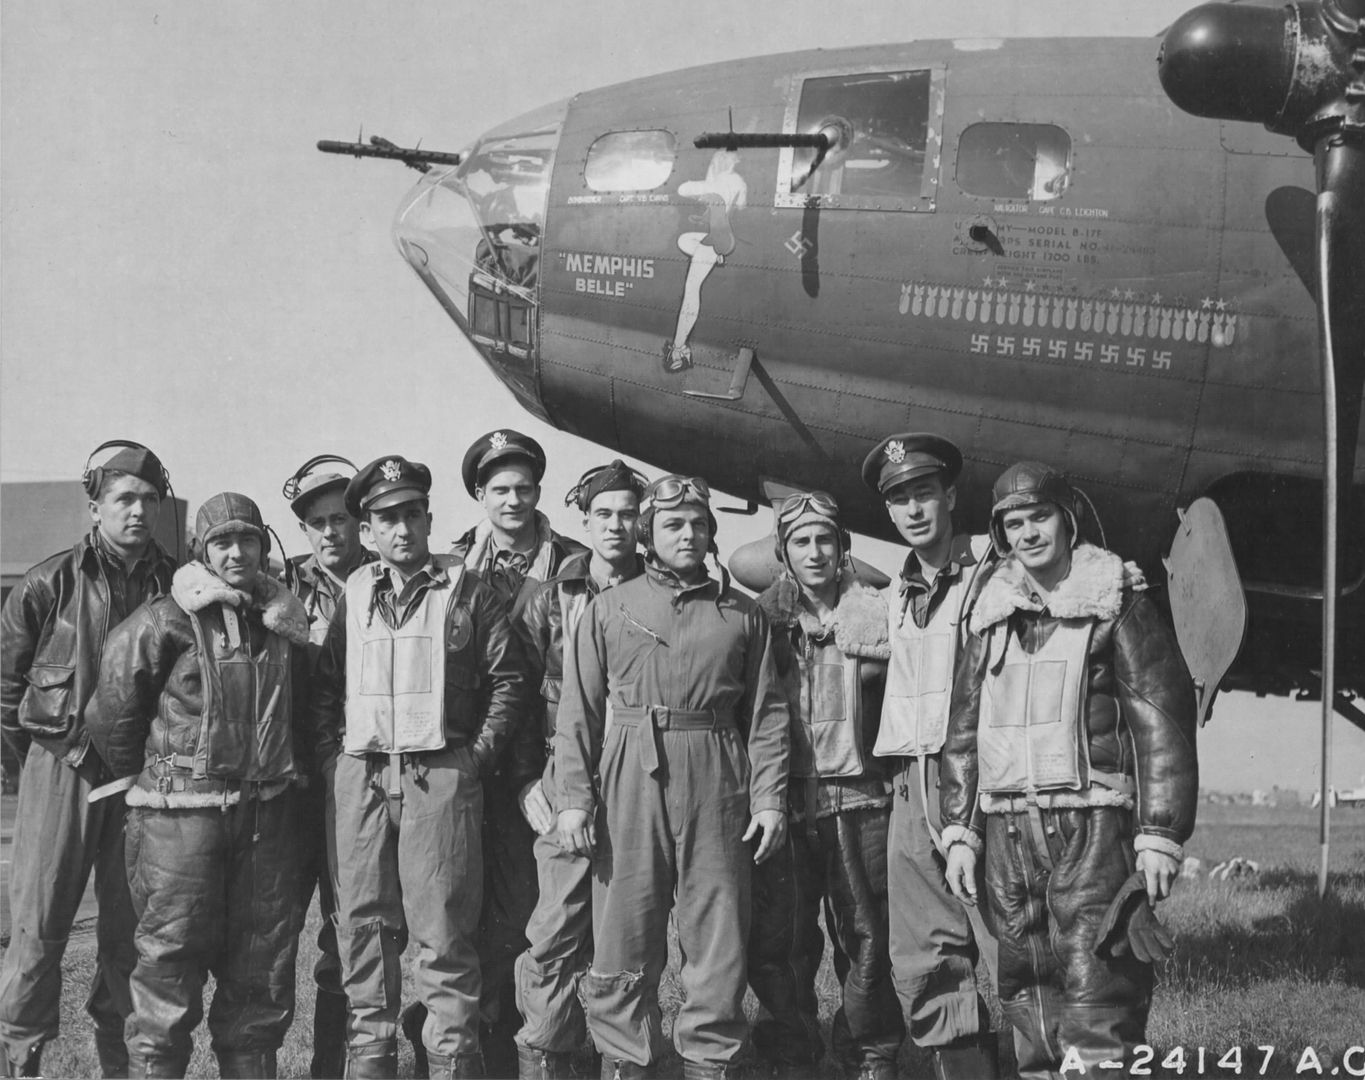 The%20crew%20of%20the%20Boeing%20B-17%20THE%20MEMPHIS%20BELLE%20is%20pictured%20at%20an%20airbase%20in%20England%20after%20completing%2025%20missions%20over%20enemy%20territory..jpg